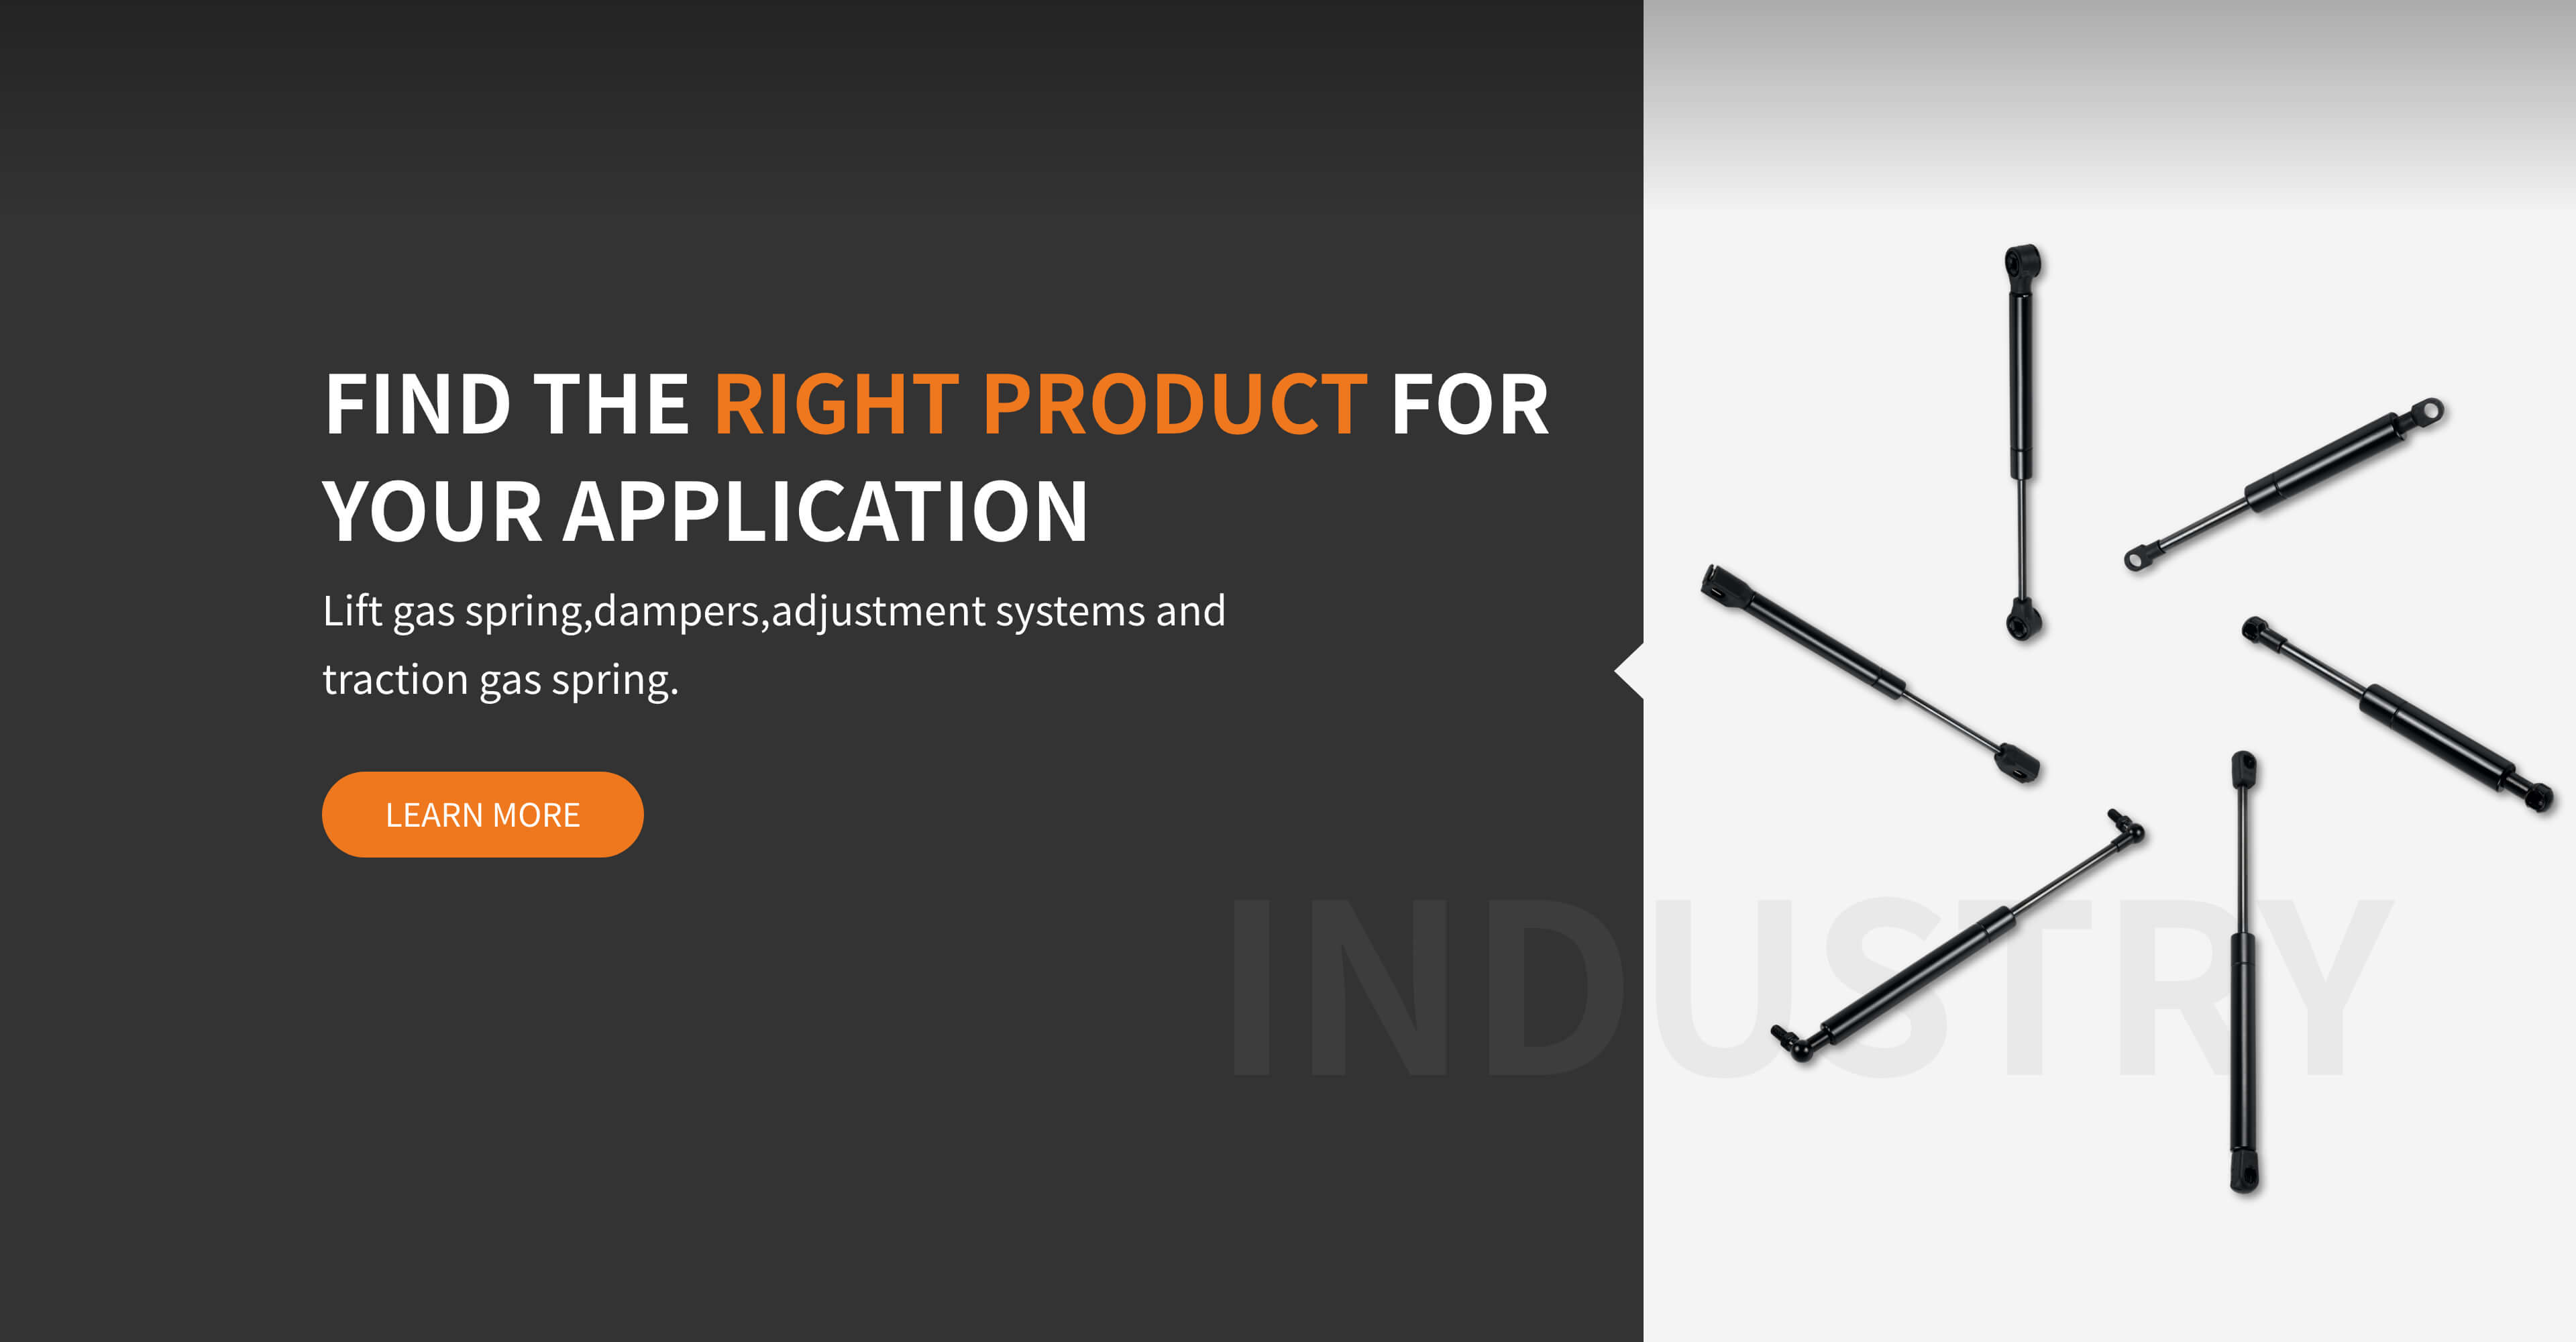 FIND THE RIGHT PRODUCT FOR YOUR APPLICATION